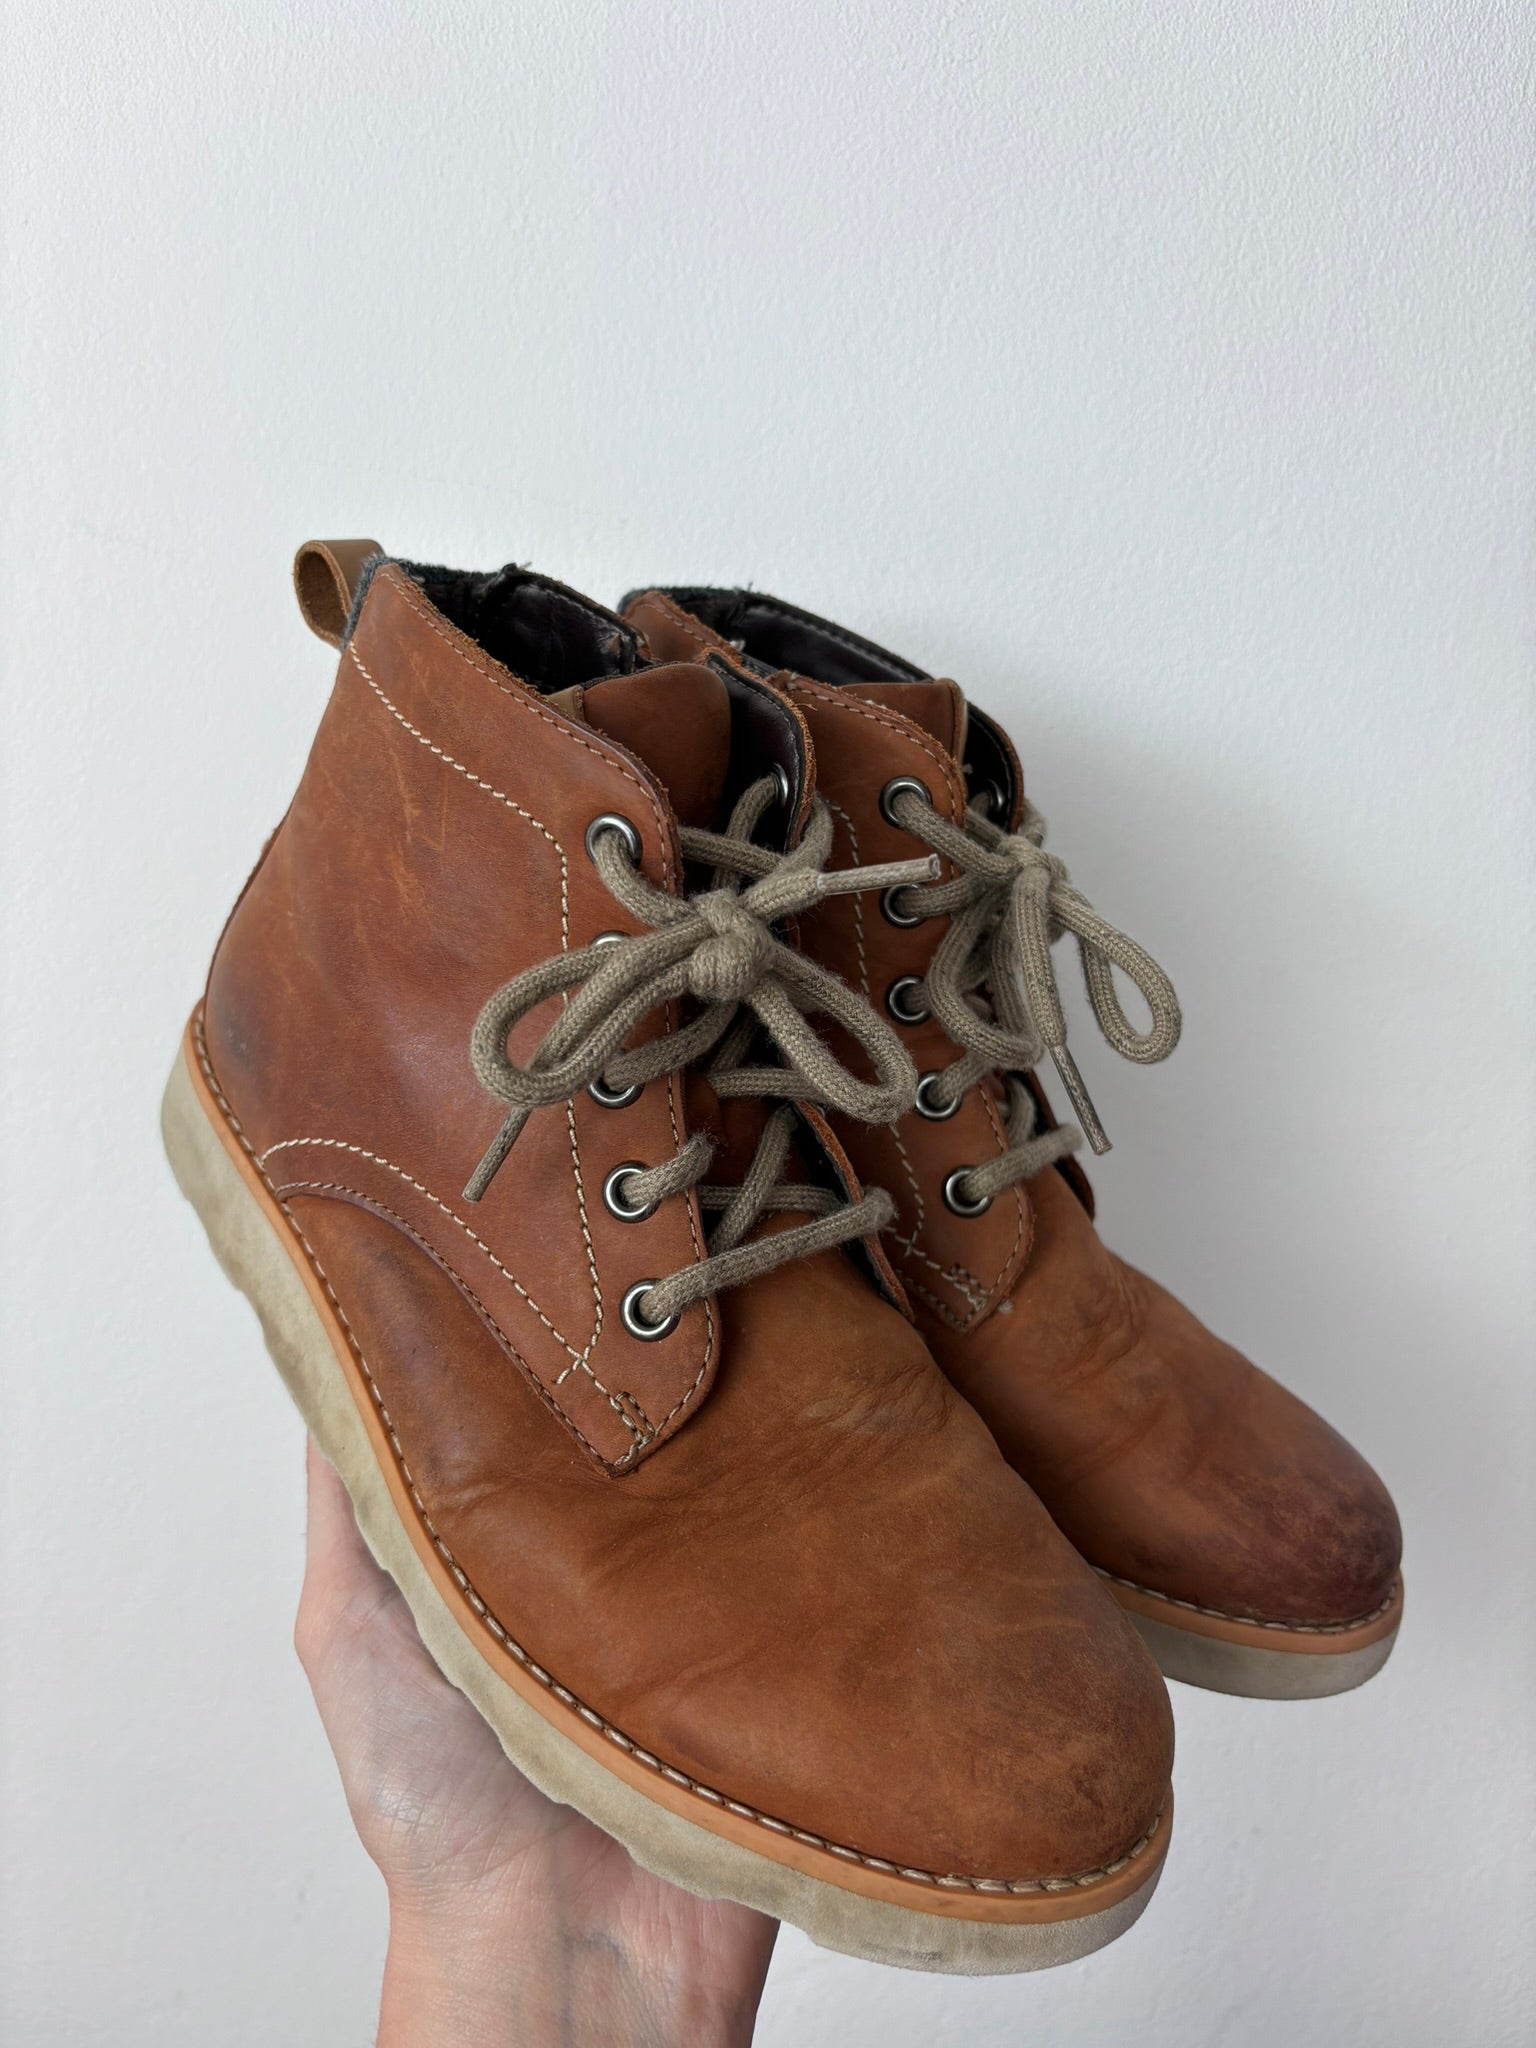 Clarks UK 2 F-Boots-Second Snuggle Preloved